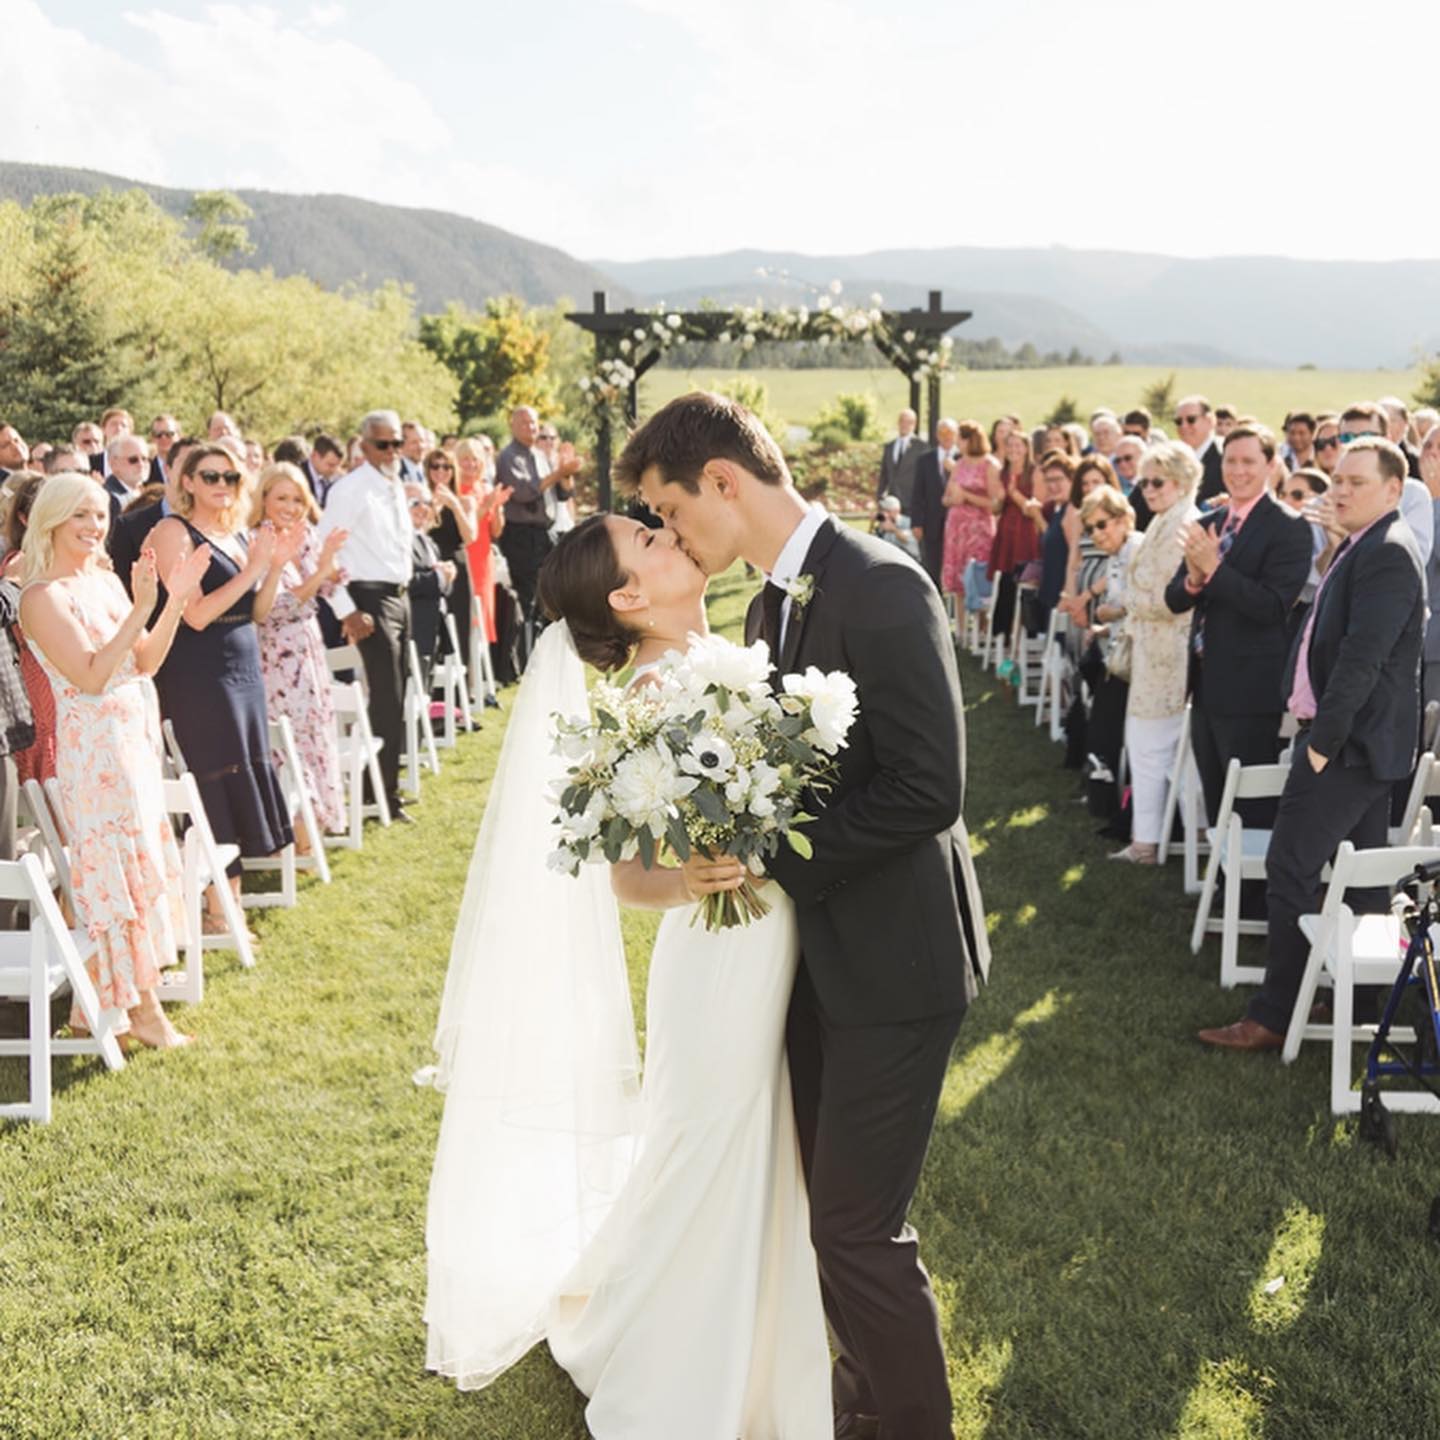 A bride and groom kissing down the aisle at their wedding ceremony that is outside